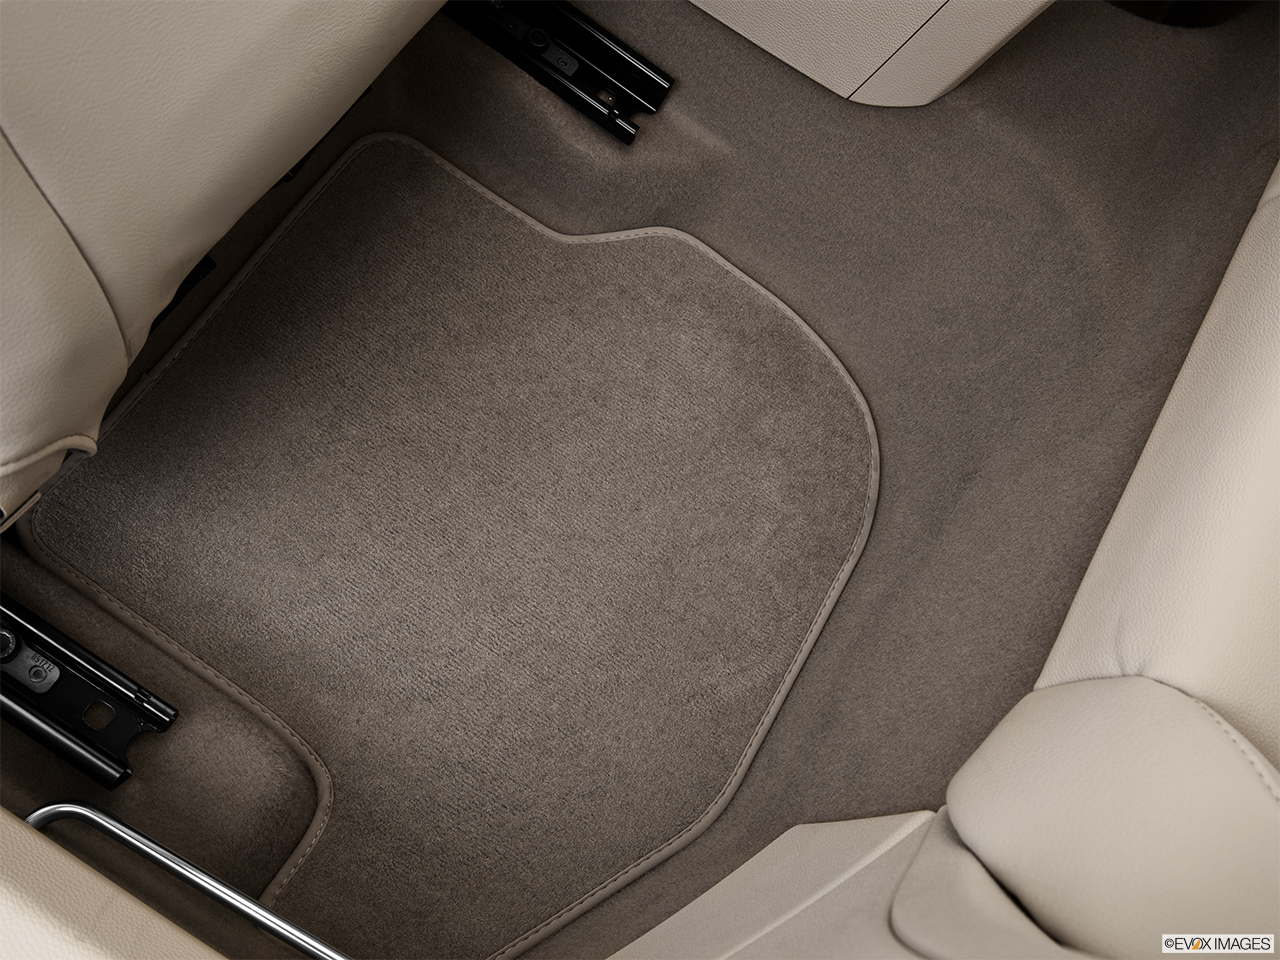 2013 Volkswagen Eos Lux Rear driver's side floor mat. Mid-seat level from outside looking in. 